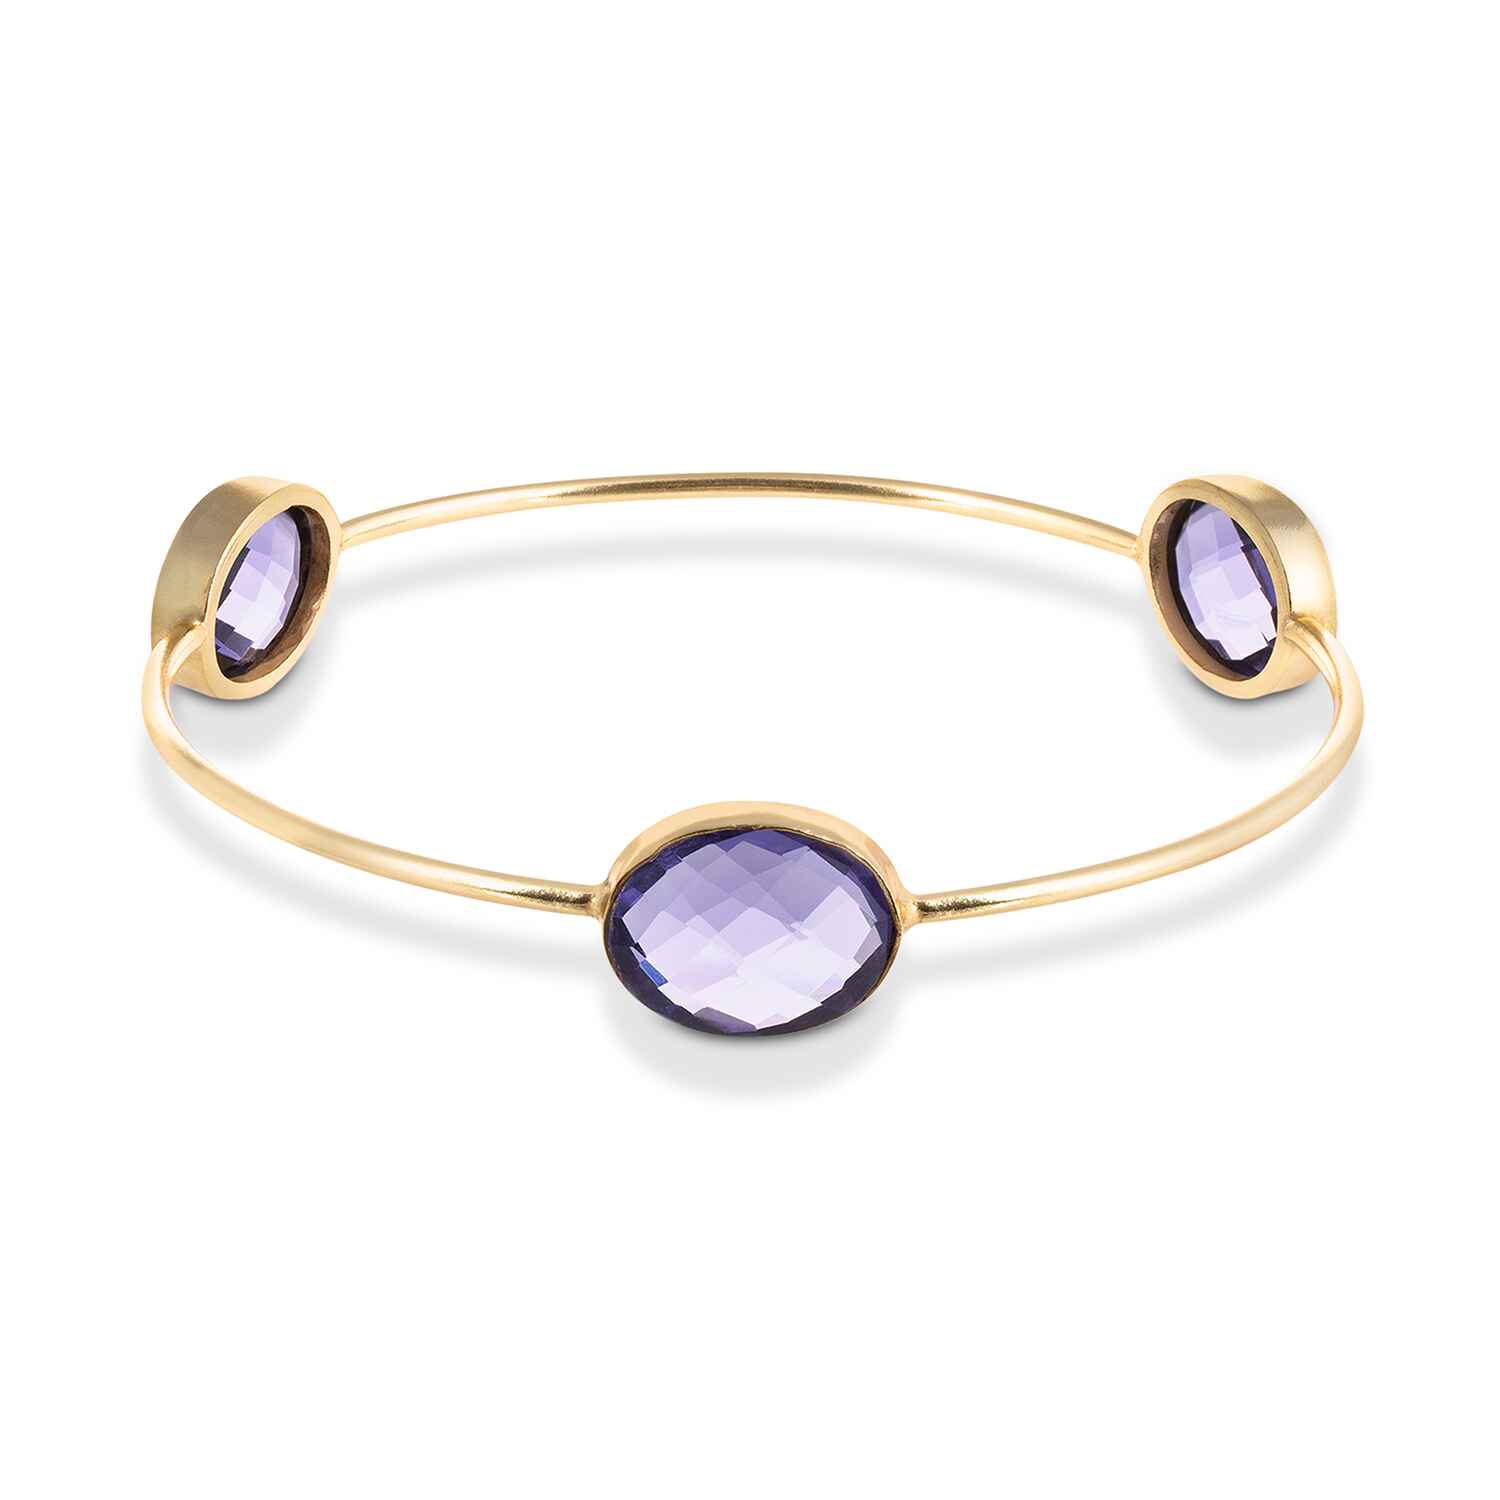 Our Sasha Gold Bangle With Lolite Gemstones is handmade with recycled materials for minimal environmental impact. Adorned with three stunning vintage lolite gemstones, this bangle catches the light with your every move.